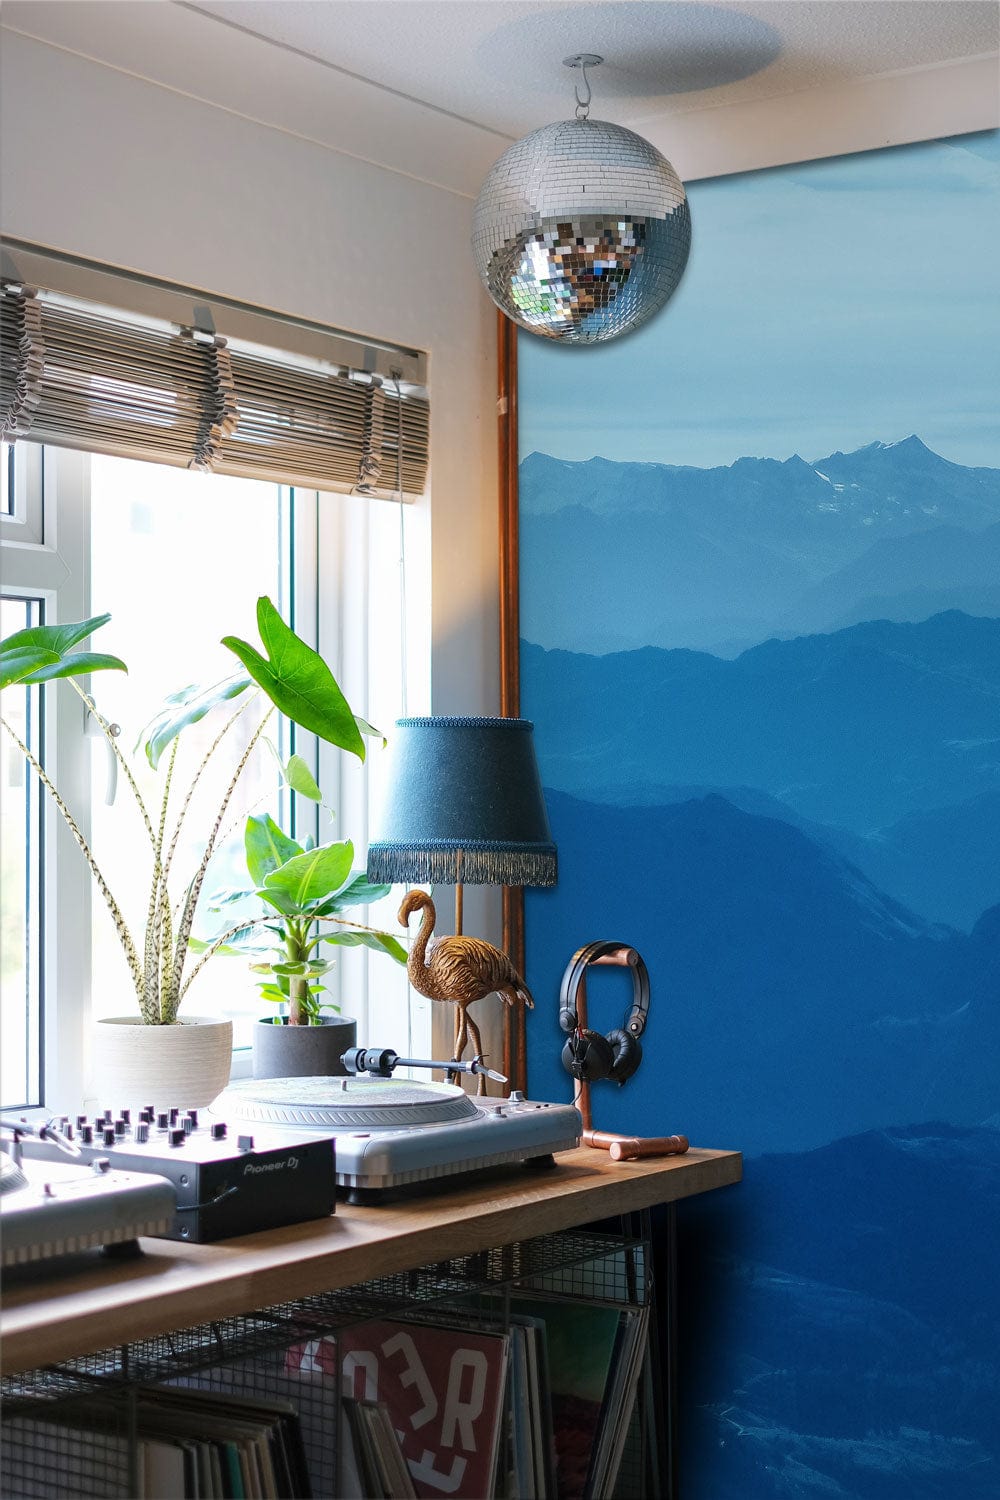 Wallpaper mural featuring hazy blue mountains for use as a hallway decoration